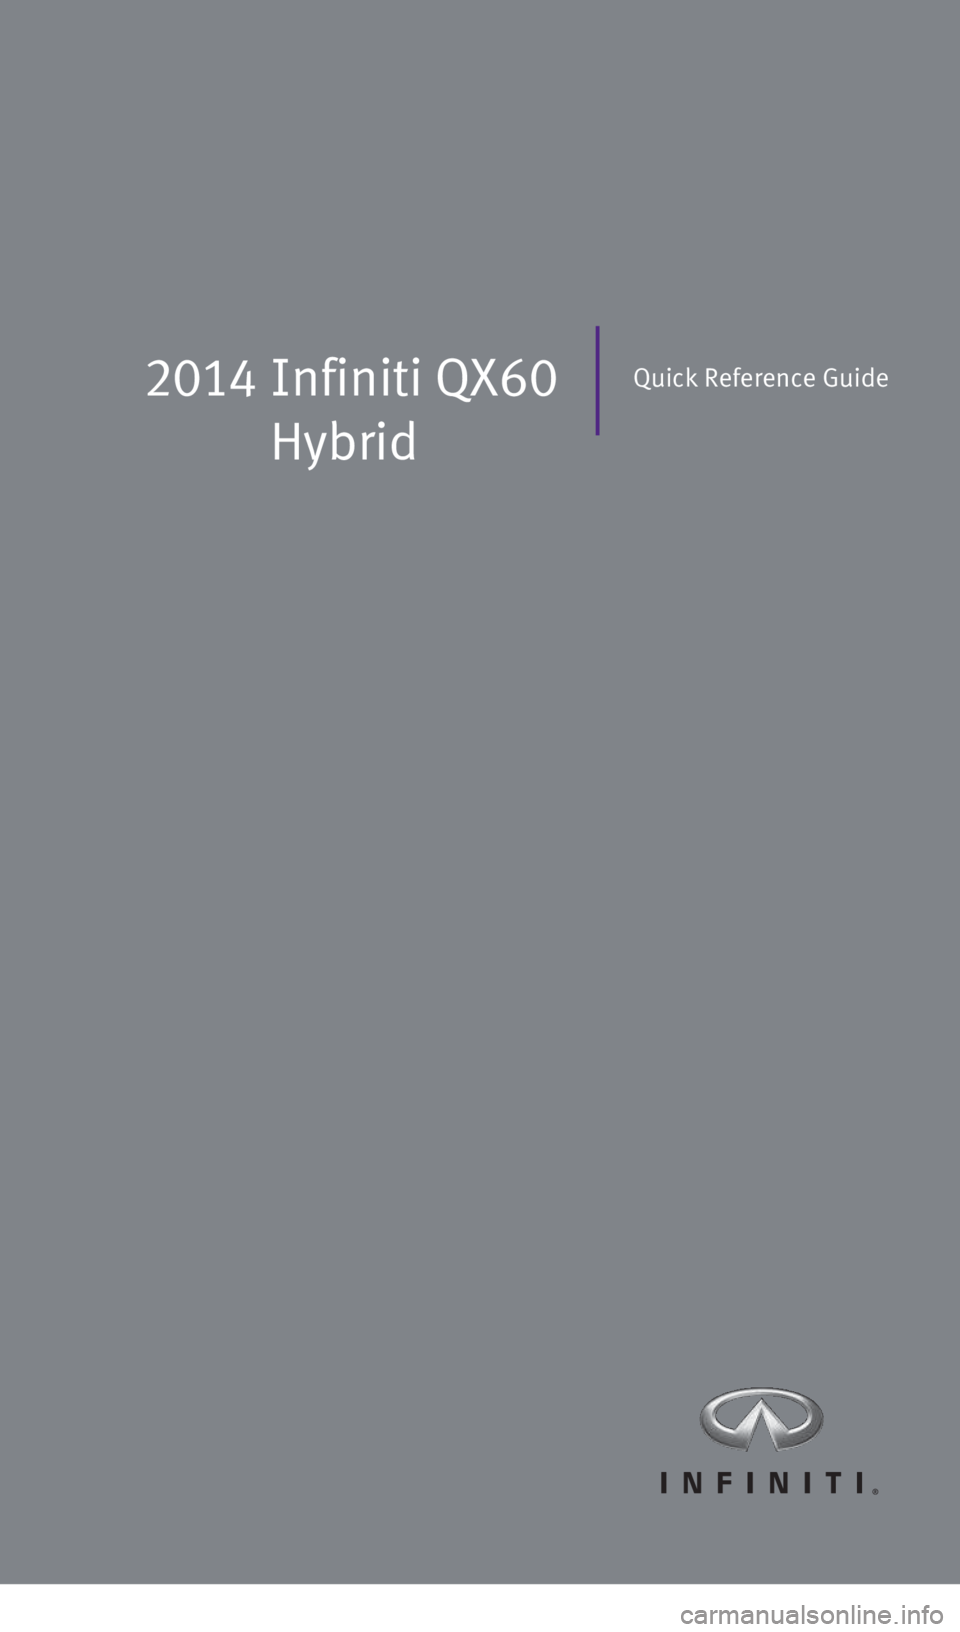 INFINITI QX60 HYBRID 2014  Quick Reference Guide 2014  Infiniti  QX60 
HybridQuick Reference Guide
1591600_14b_Infiniti_QX60_HEV_QRG_092413.indd   29/24/13   11:43 AM 